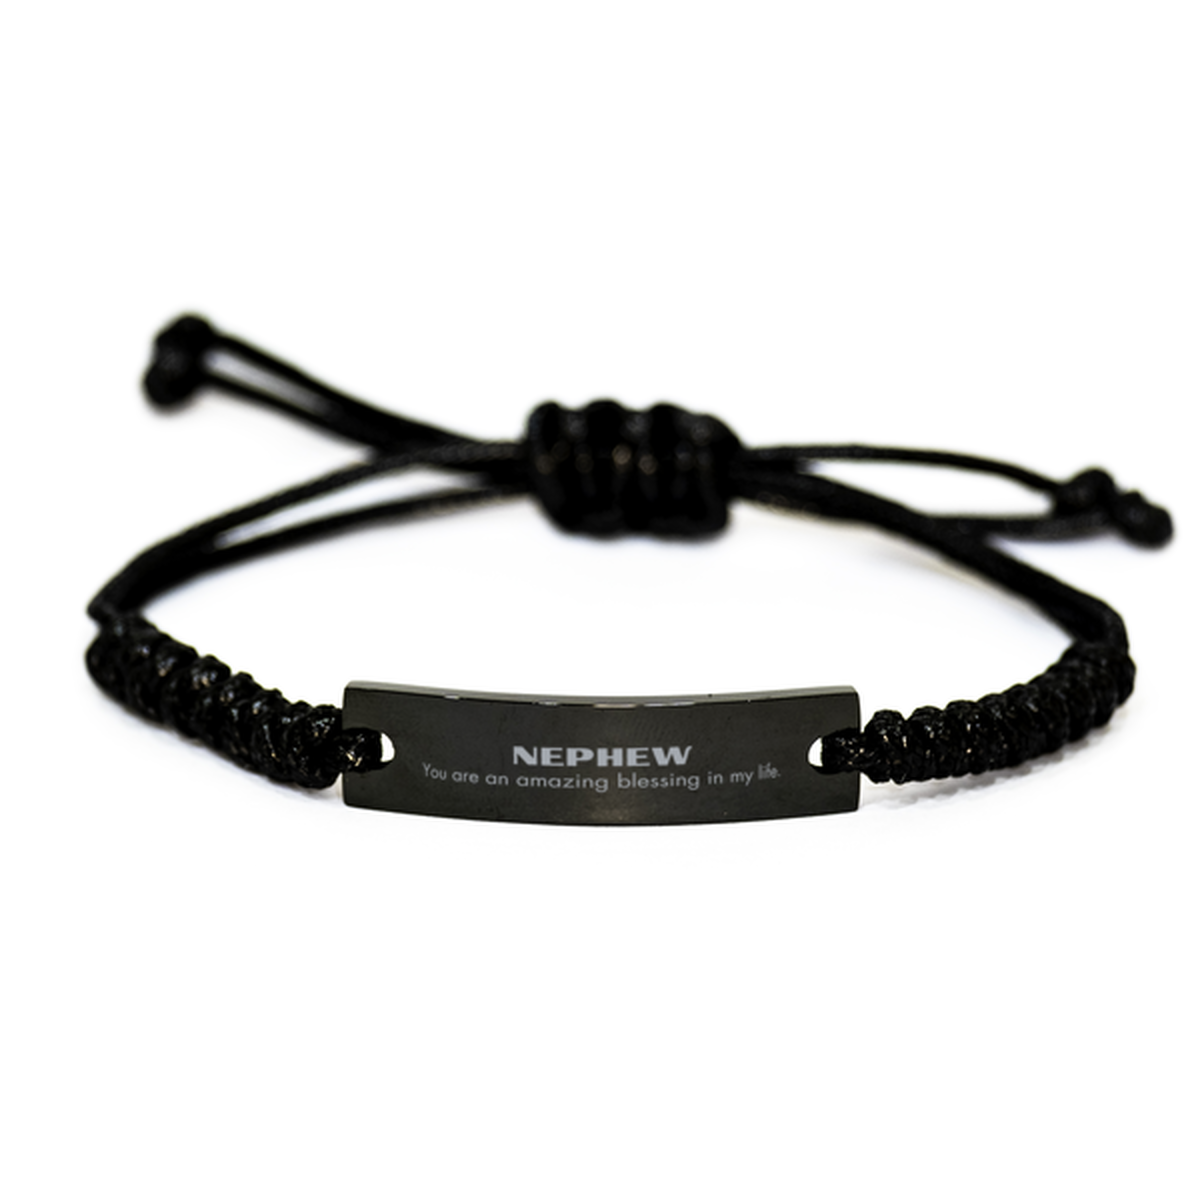 Nephew Black Rope Bracelet, You are an amazing blessing in my life, Thank You Gifts For Nephew, Inspirational Birthday Christmas Unique Gifts For Nephew